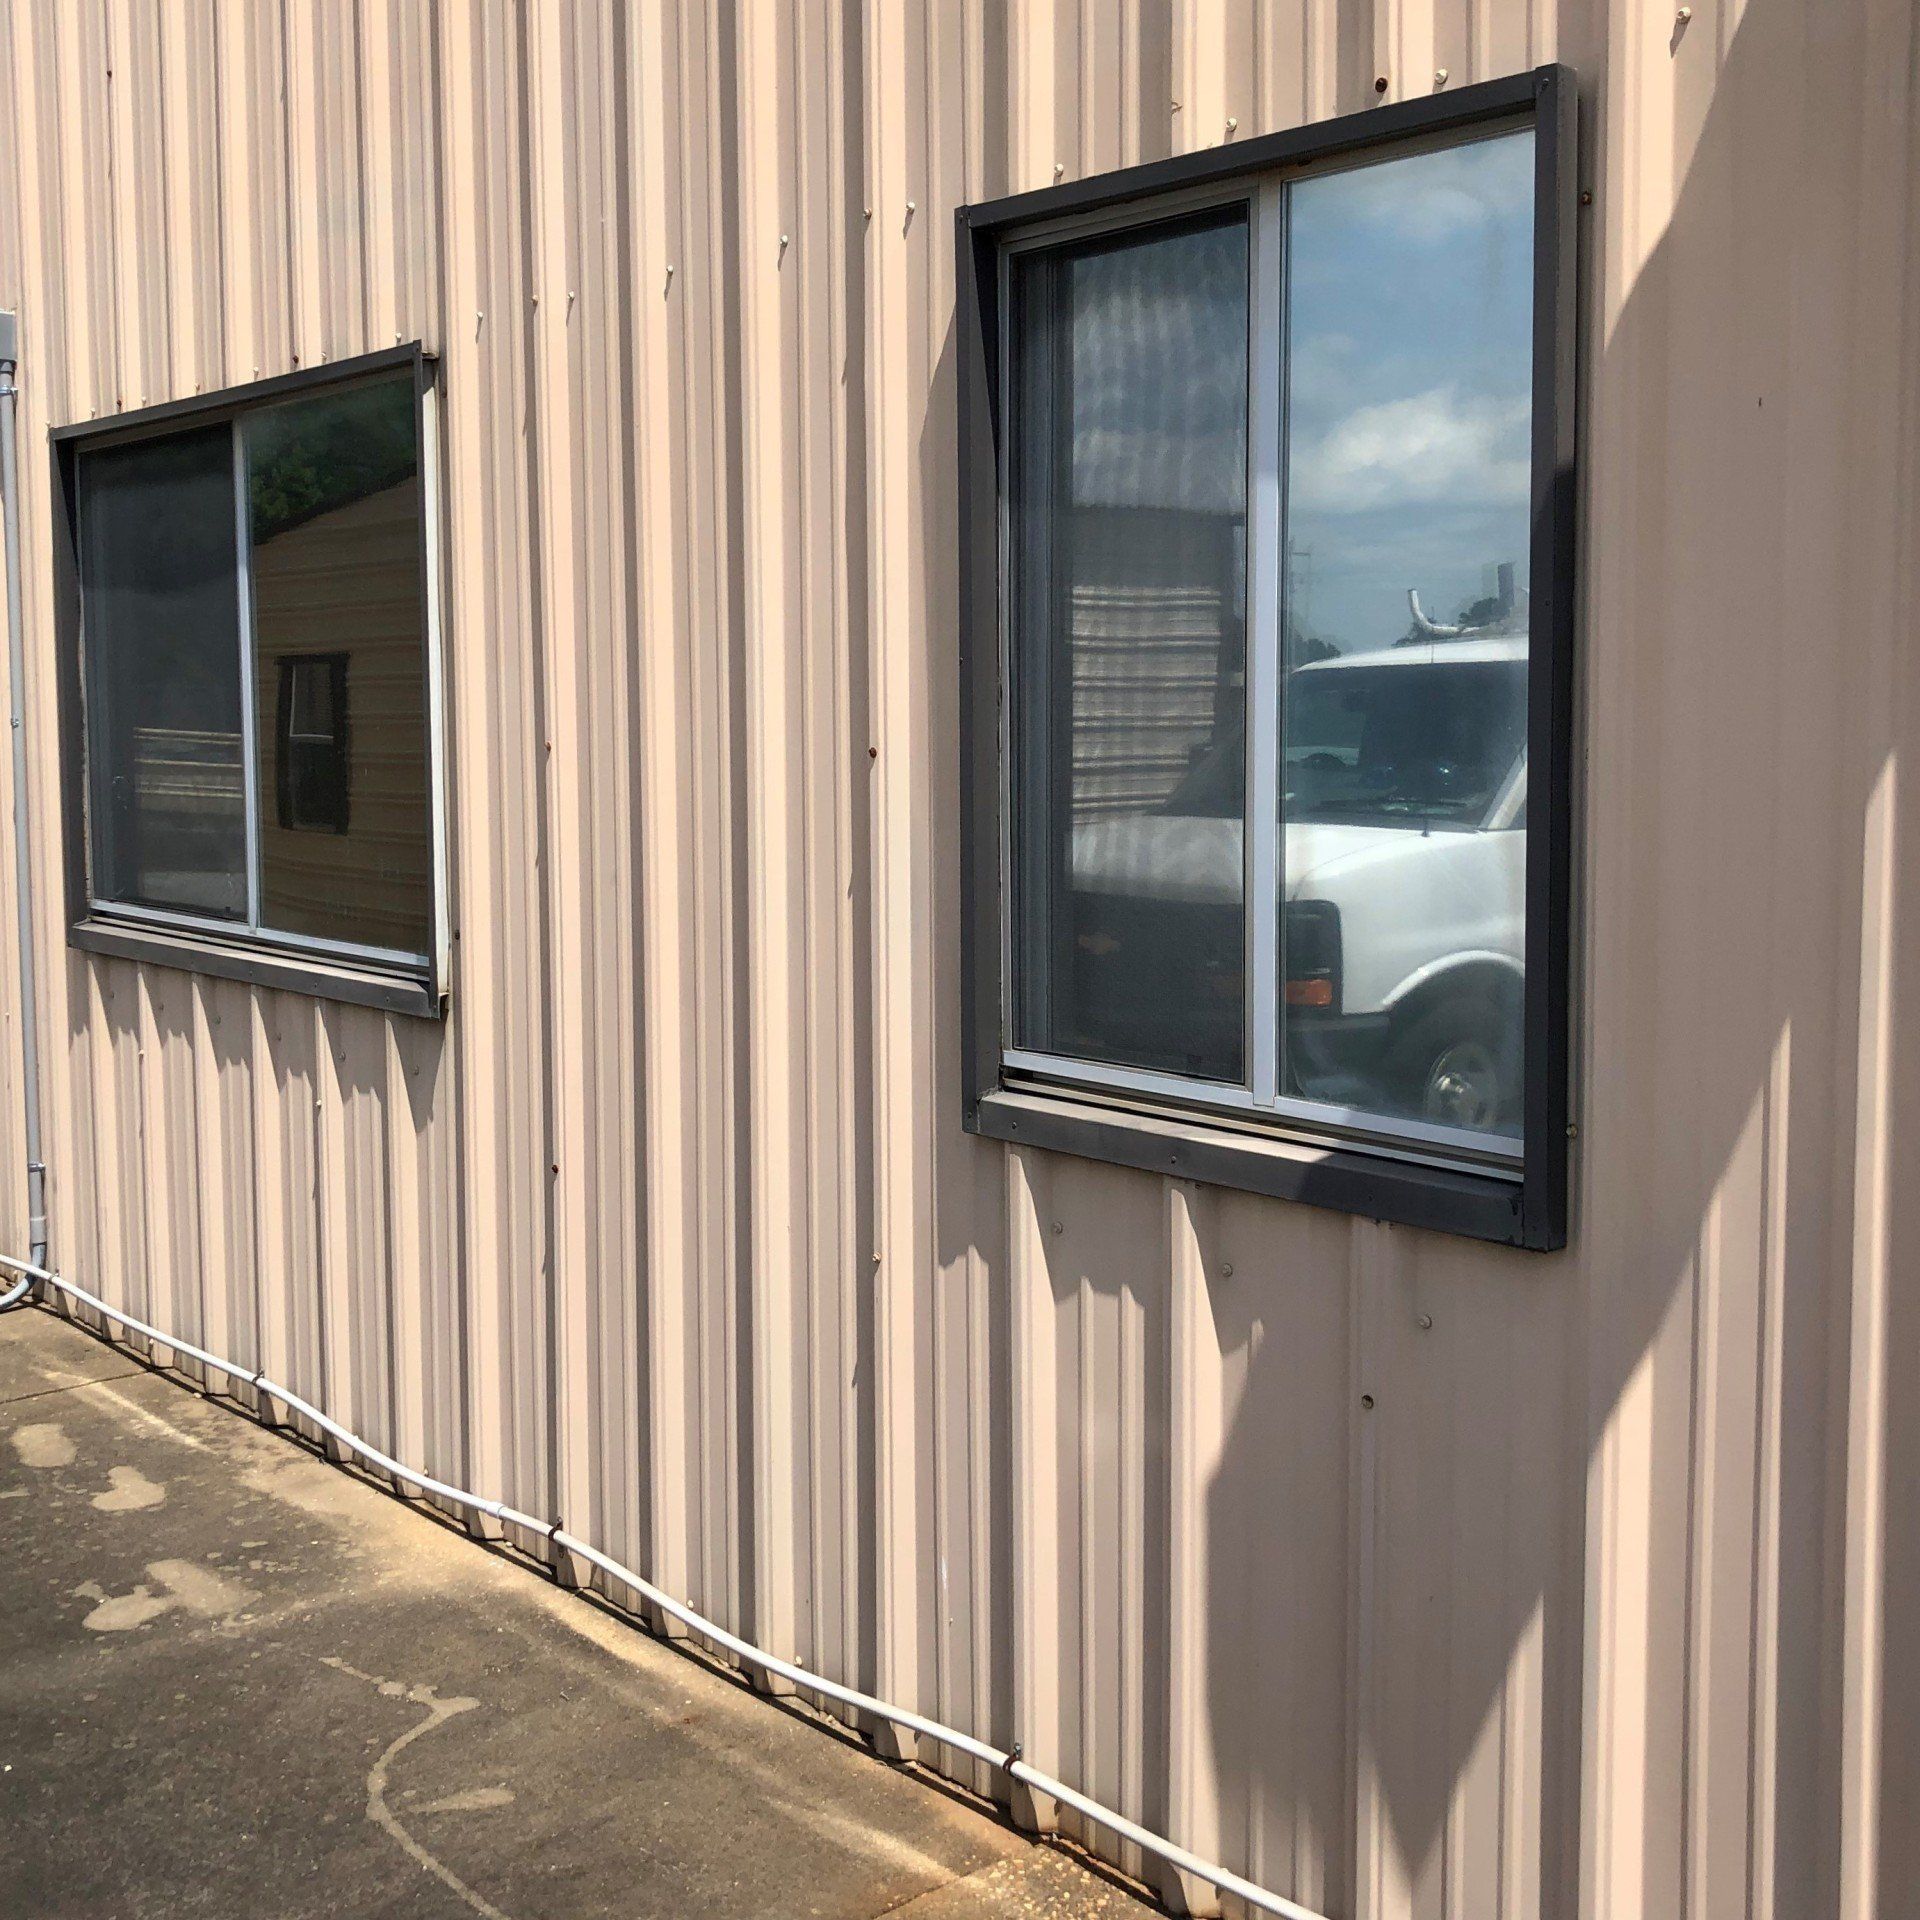 professional tint installed at Department of Transportation in Troy Alabama on 7.8.2019